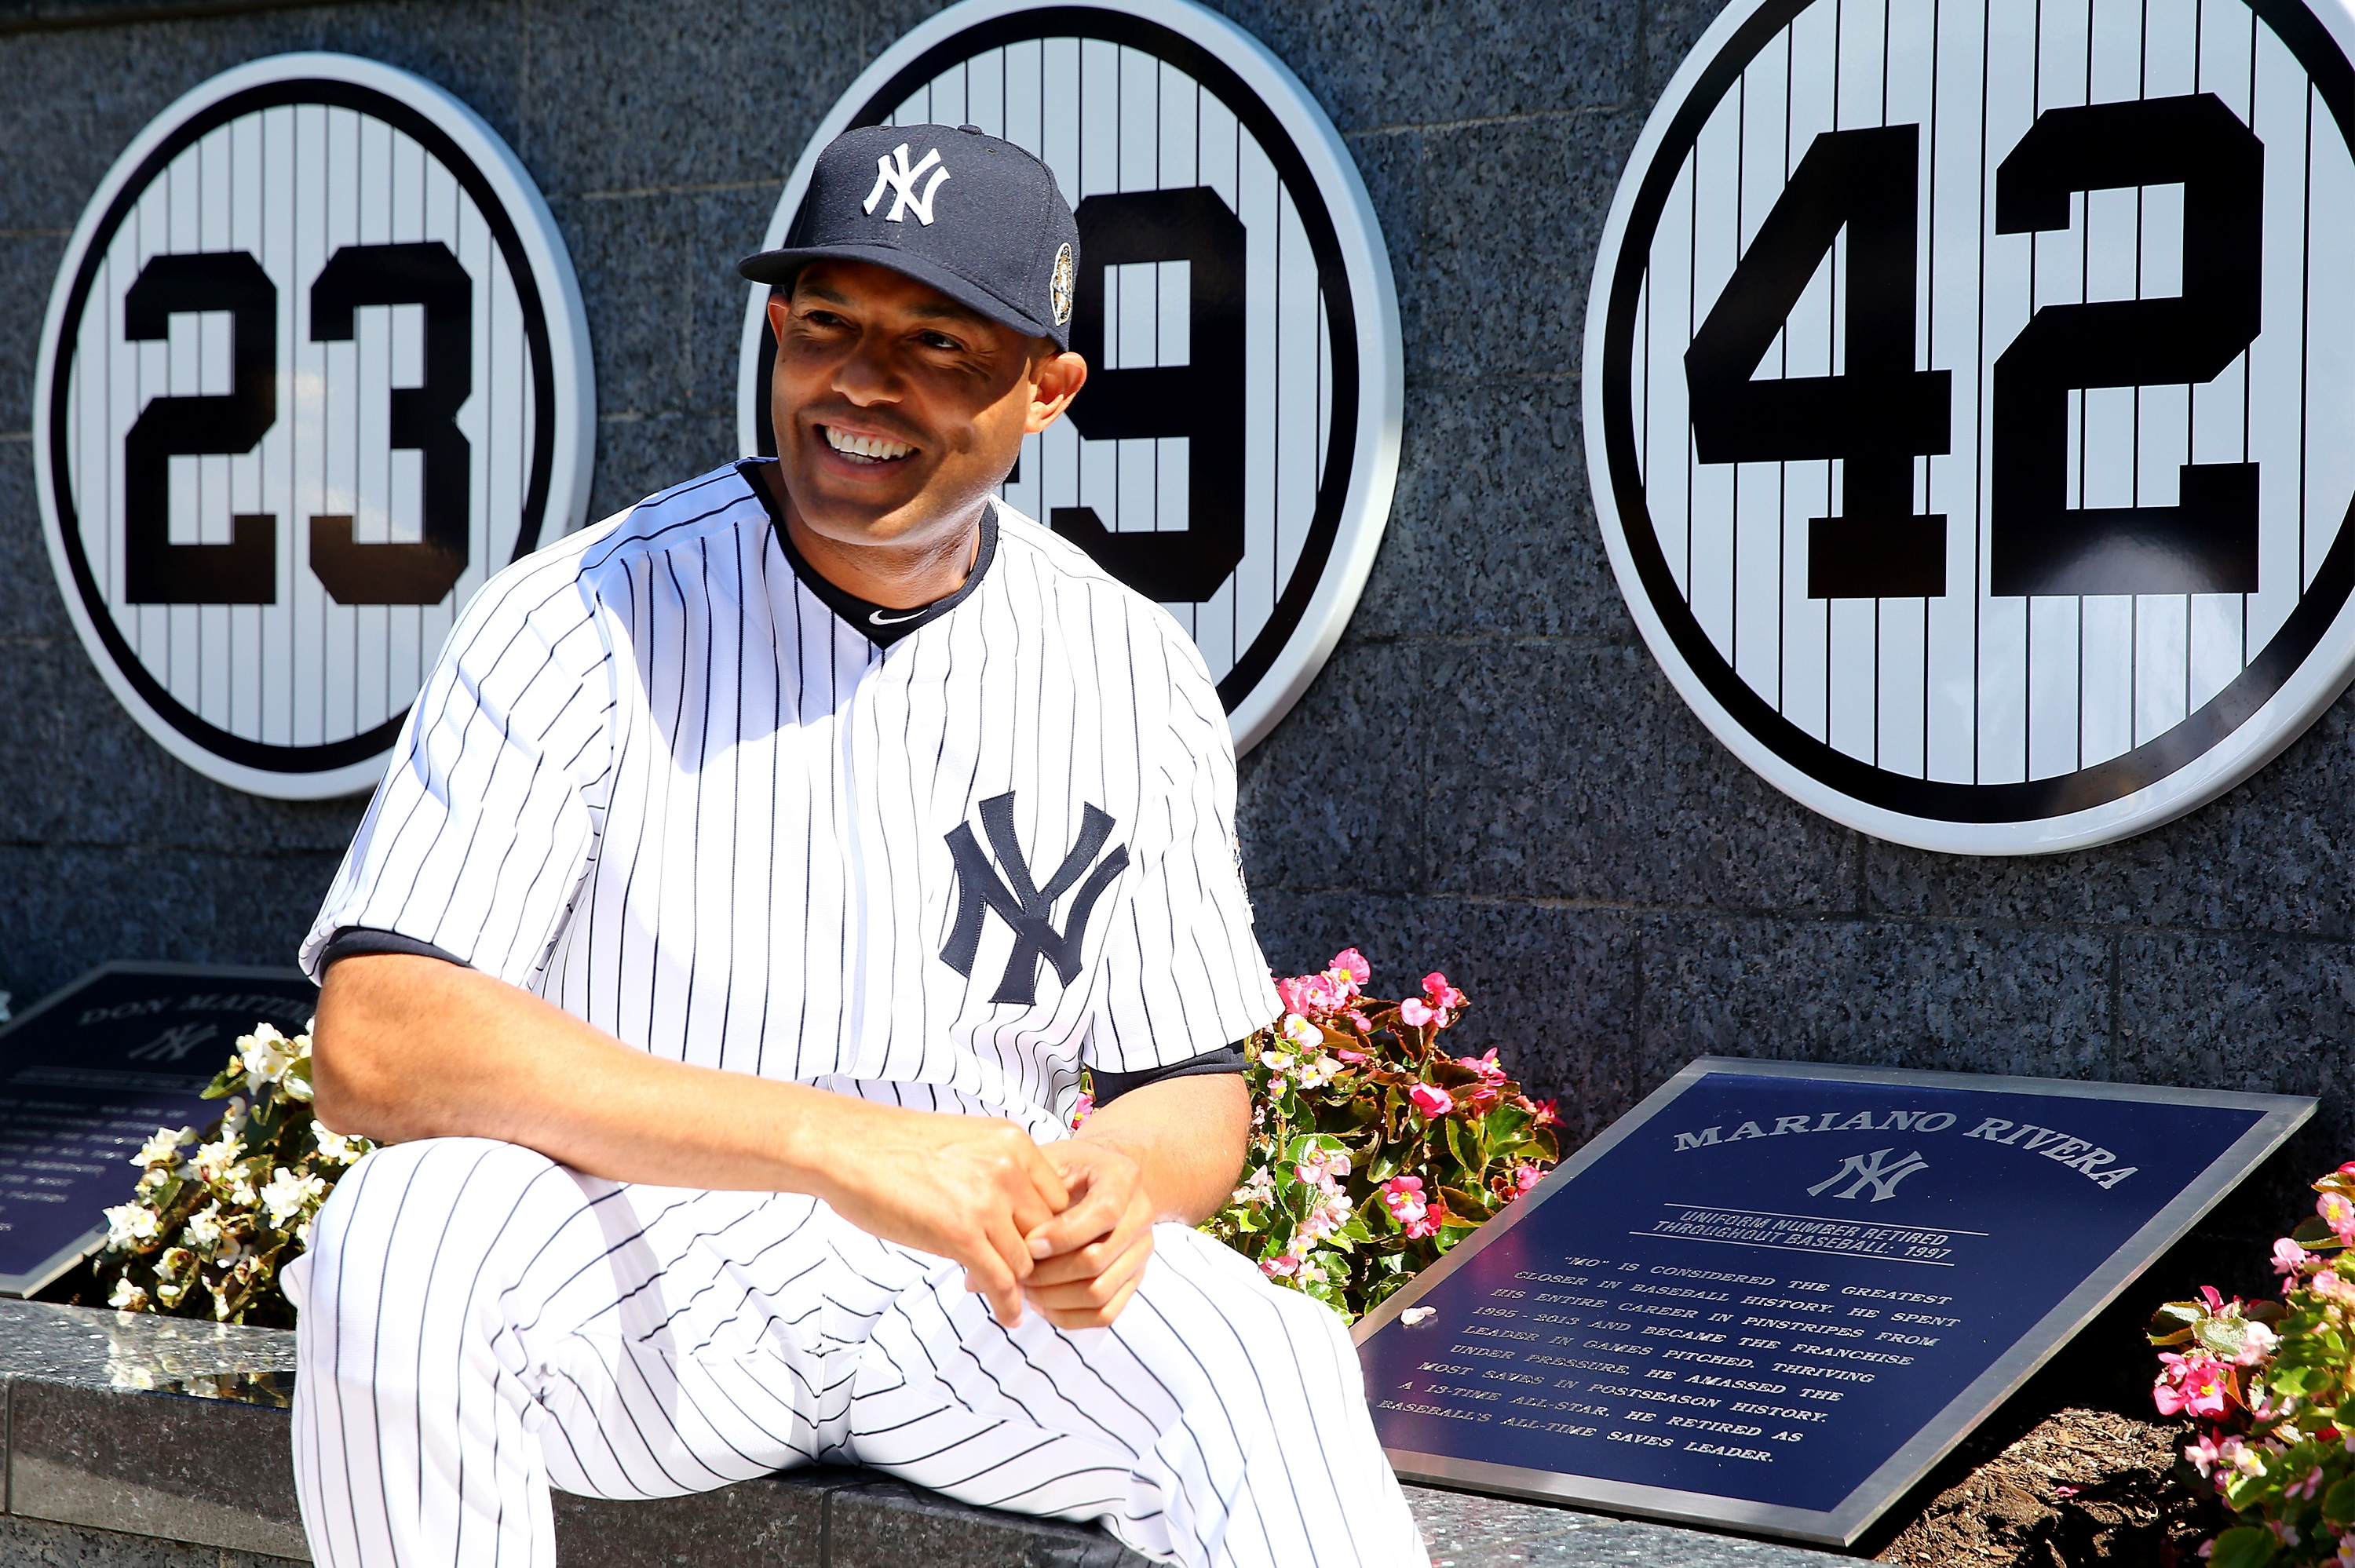 Who was the better reliever in their prime, Mariano Rivera or